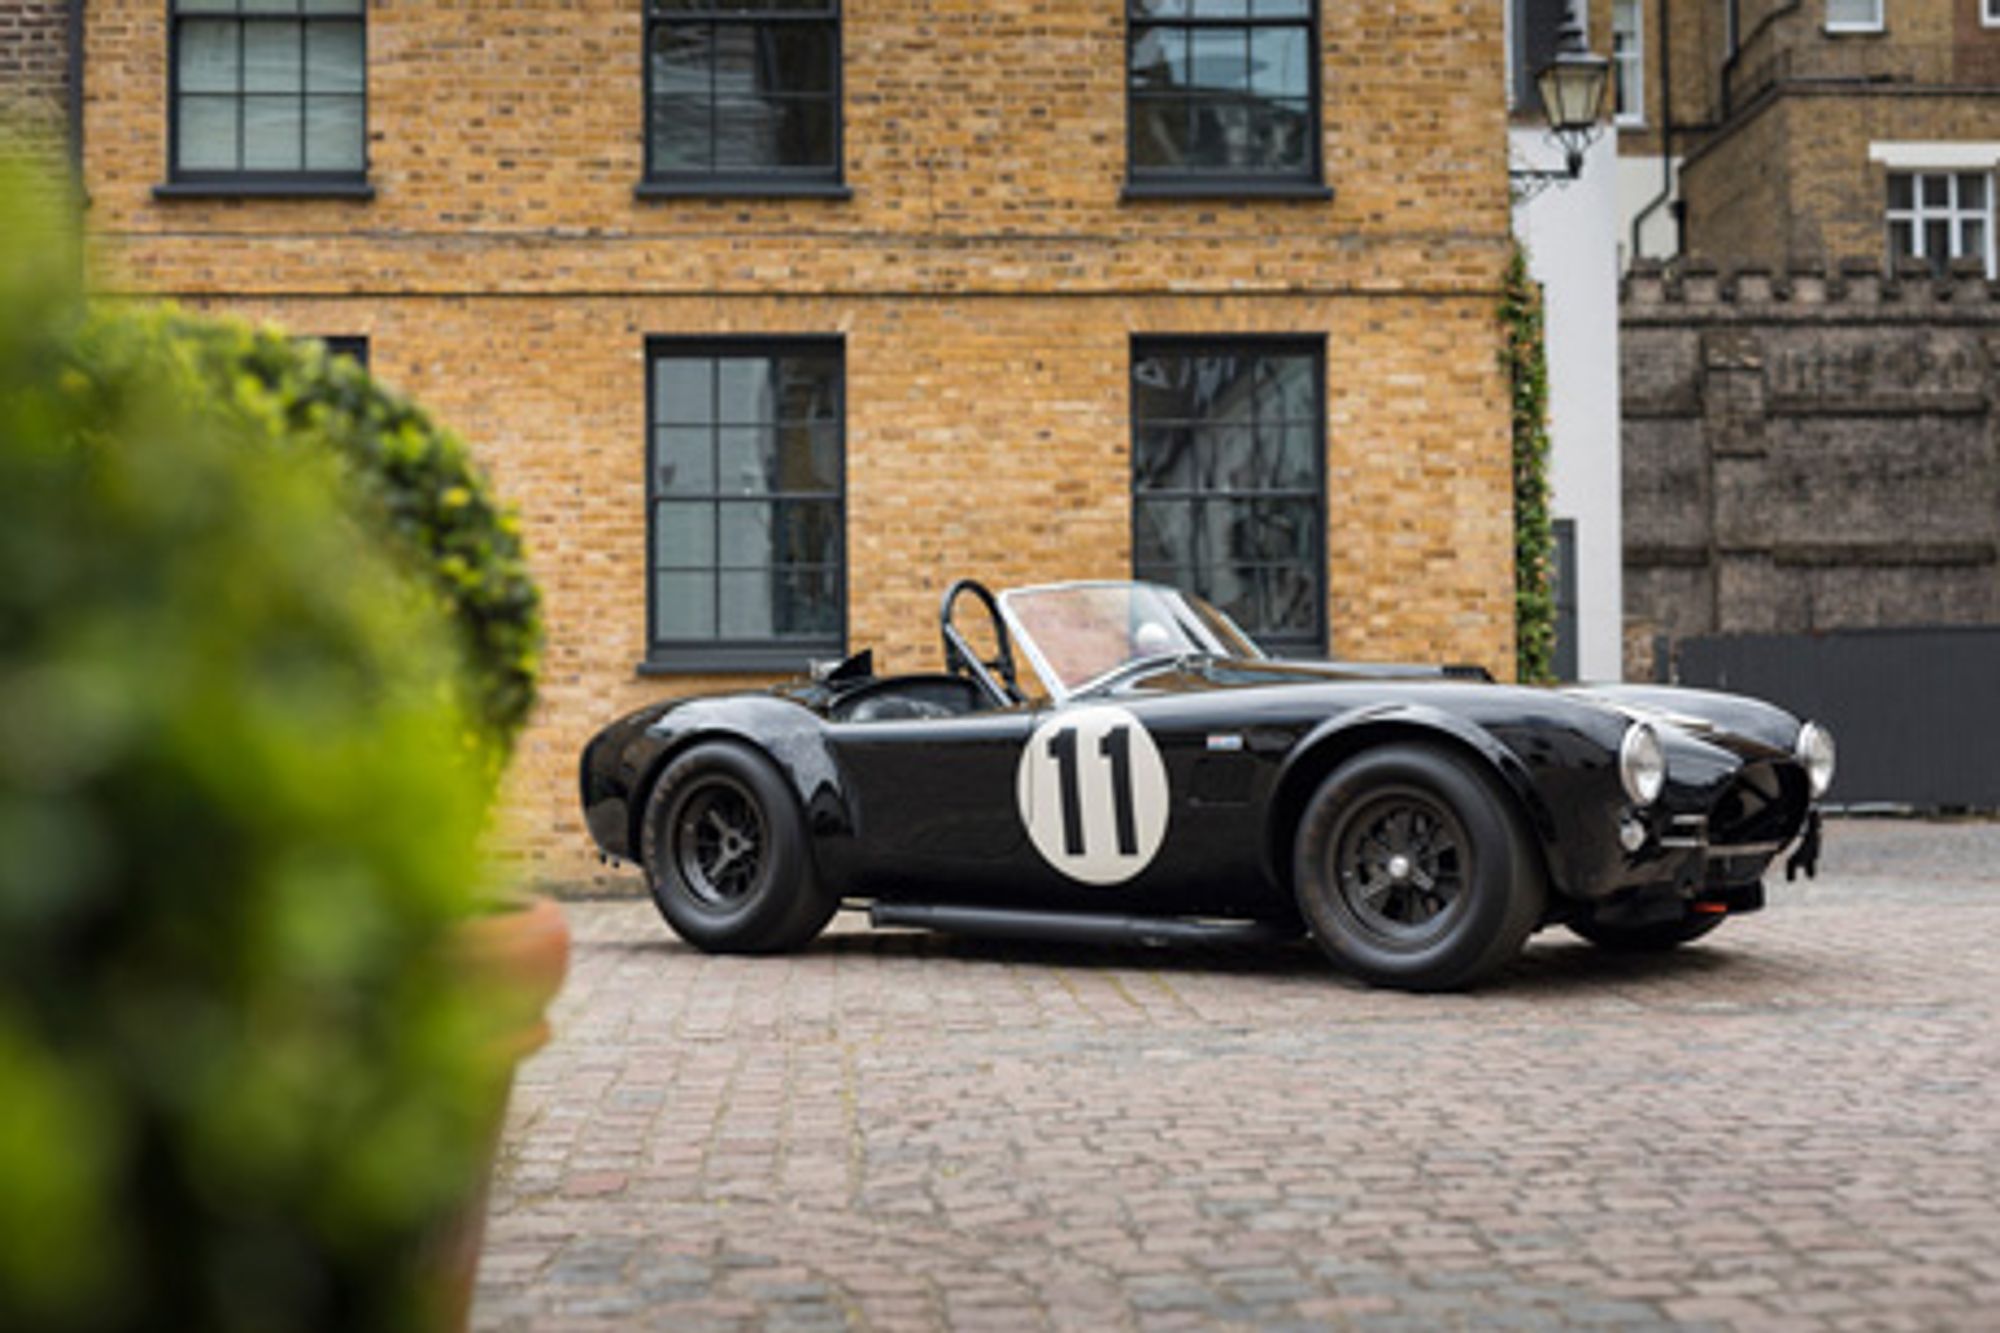 Fiskens will be attending London’s inaugural City Concours on 8-9 June